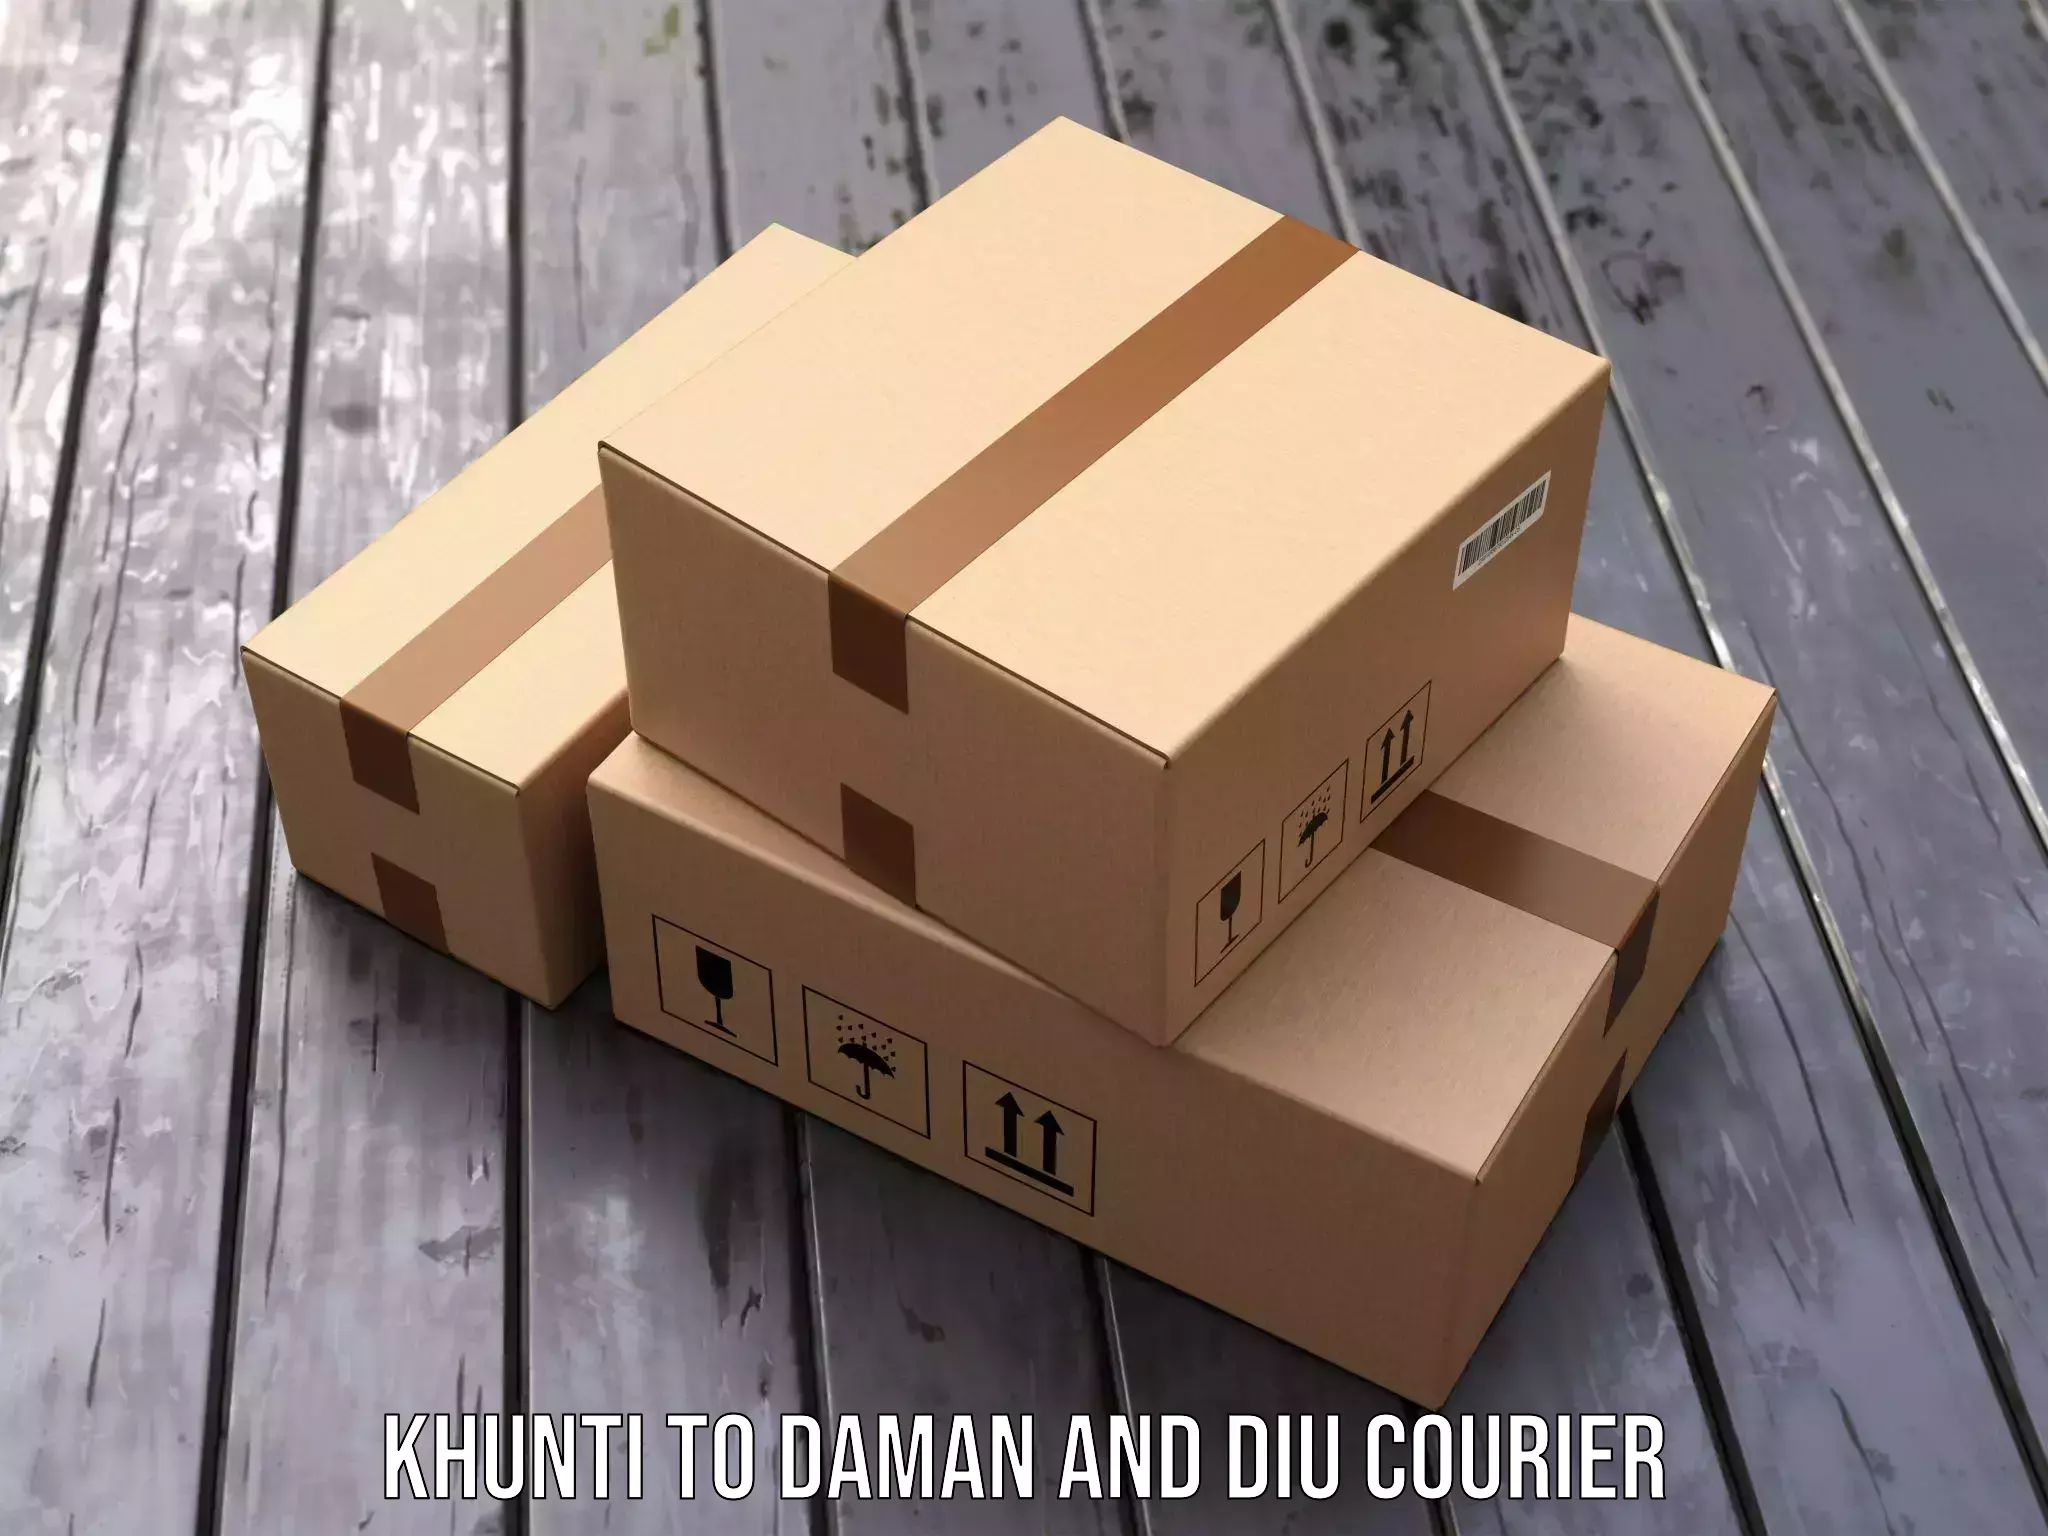 Multi-national courier services Khunti to Daman and Diu